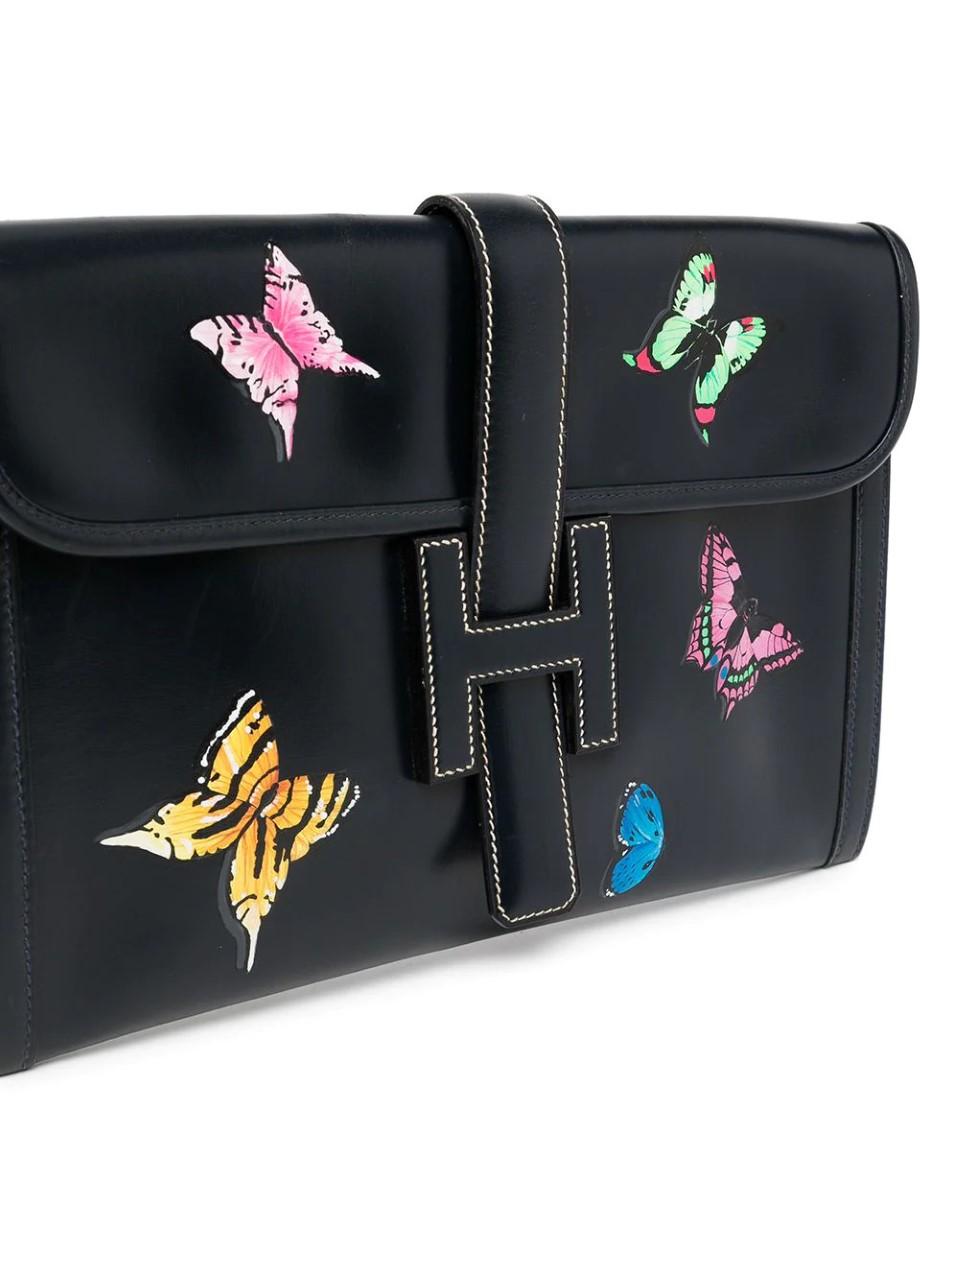 Add a glamorous feel to a more casual outfit with this one-of-a-kind piece. Featuring a unique hand-painted butterfly motif in a vivid colour palette, the bag can be secured using the iconic 'H' logo fold-over strap. Designed with contrasting